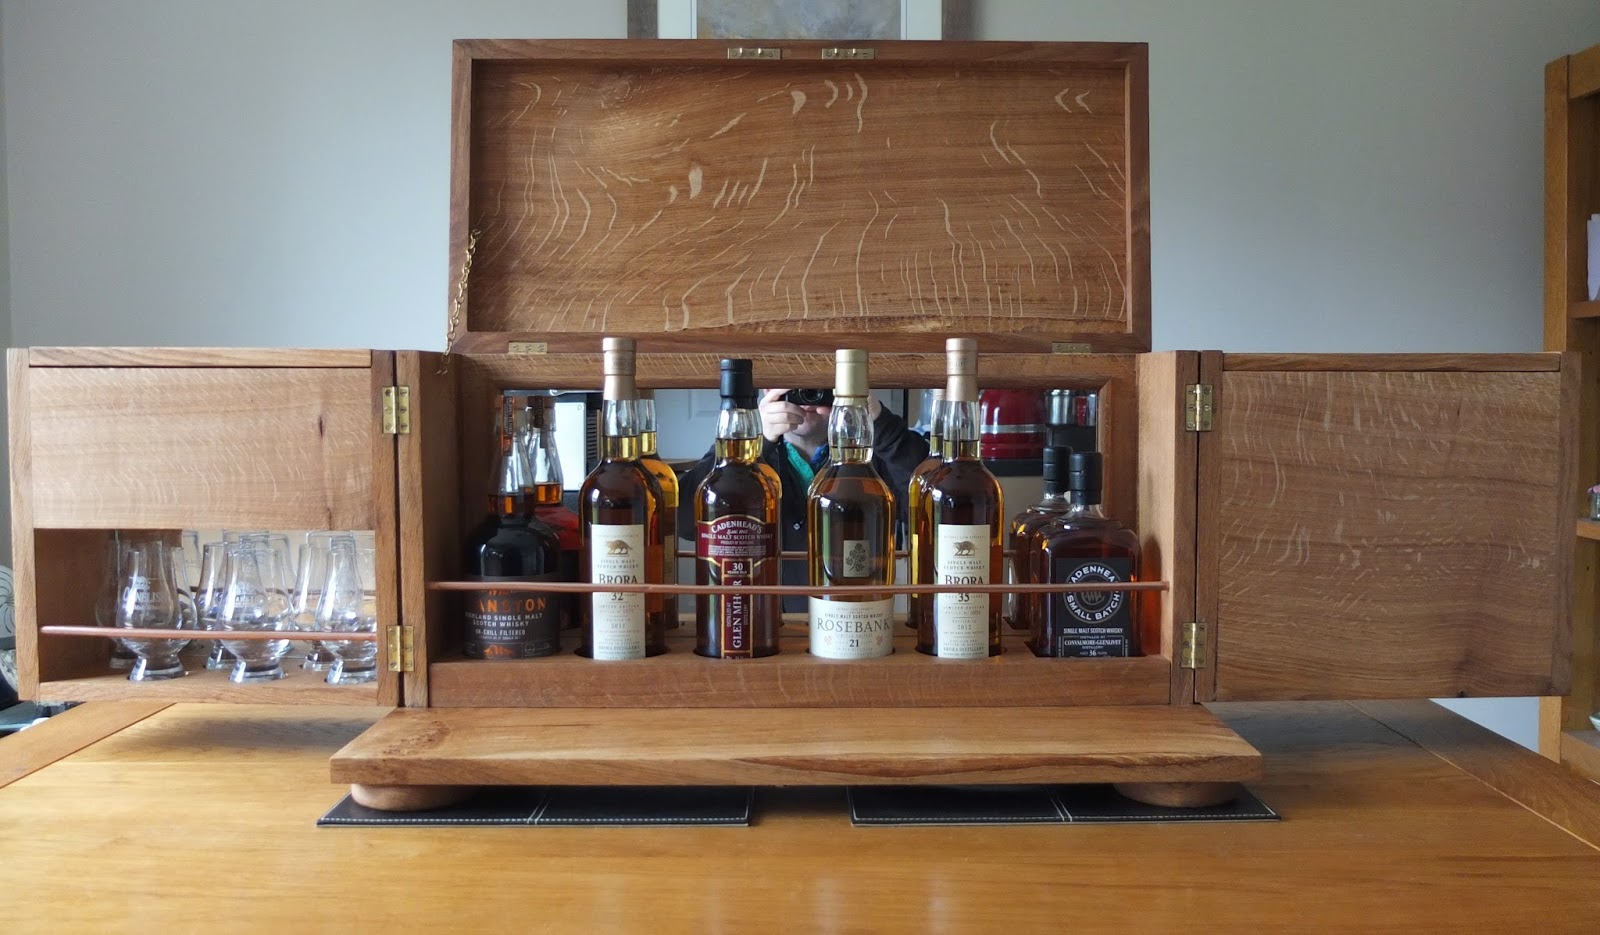 The Whisky Display Cabinet Malt Whisky Reviews